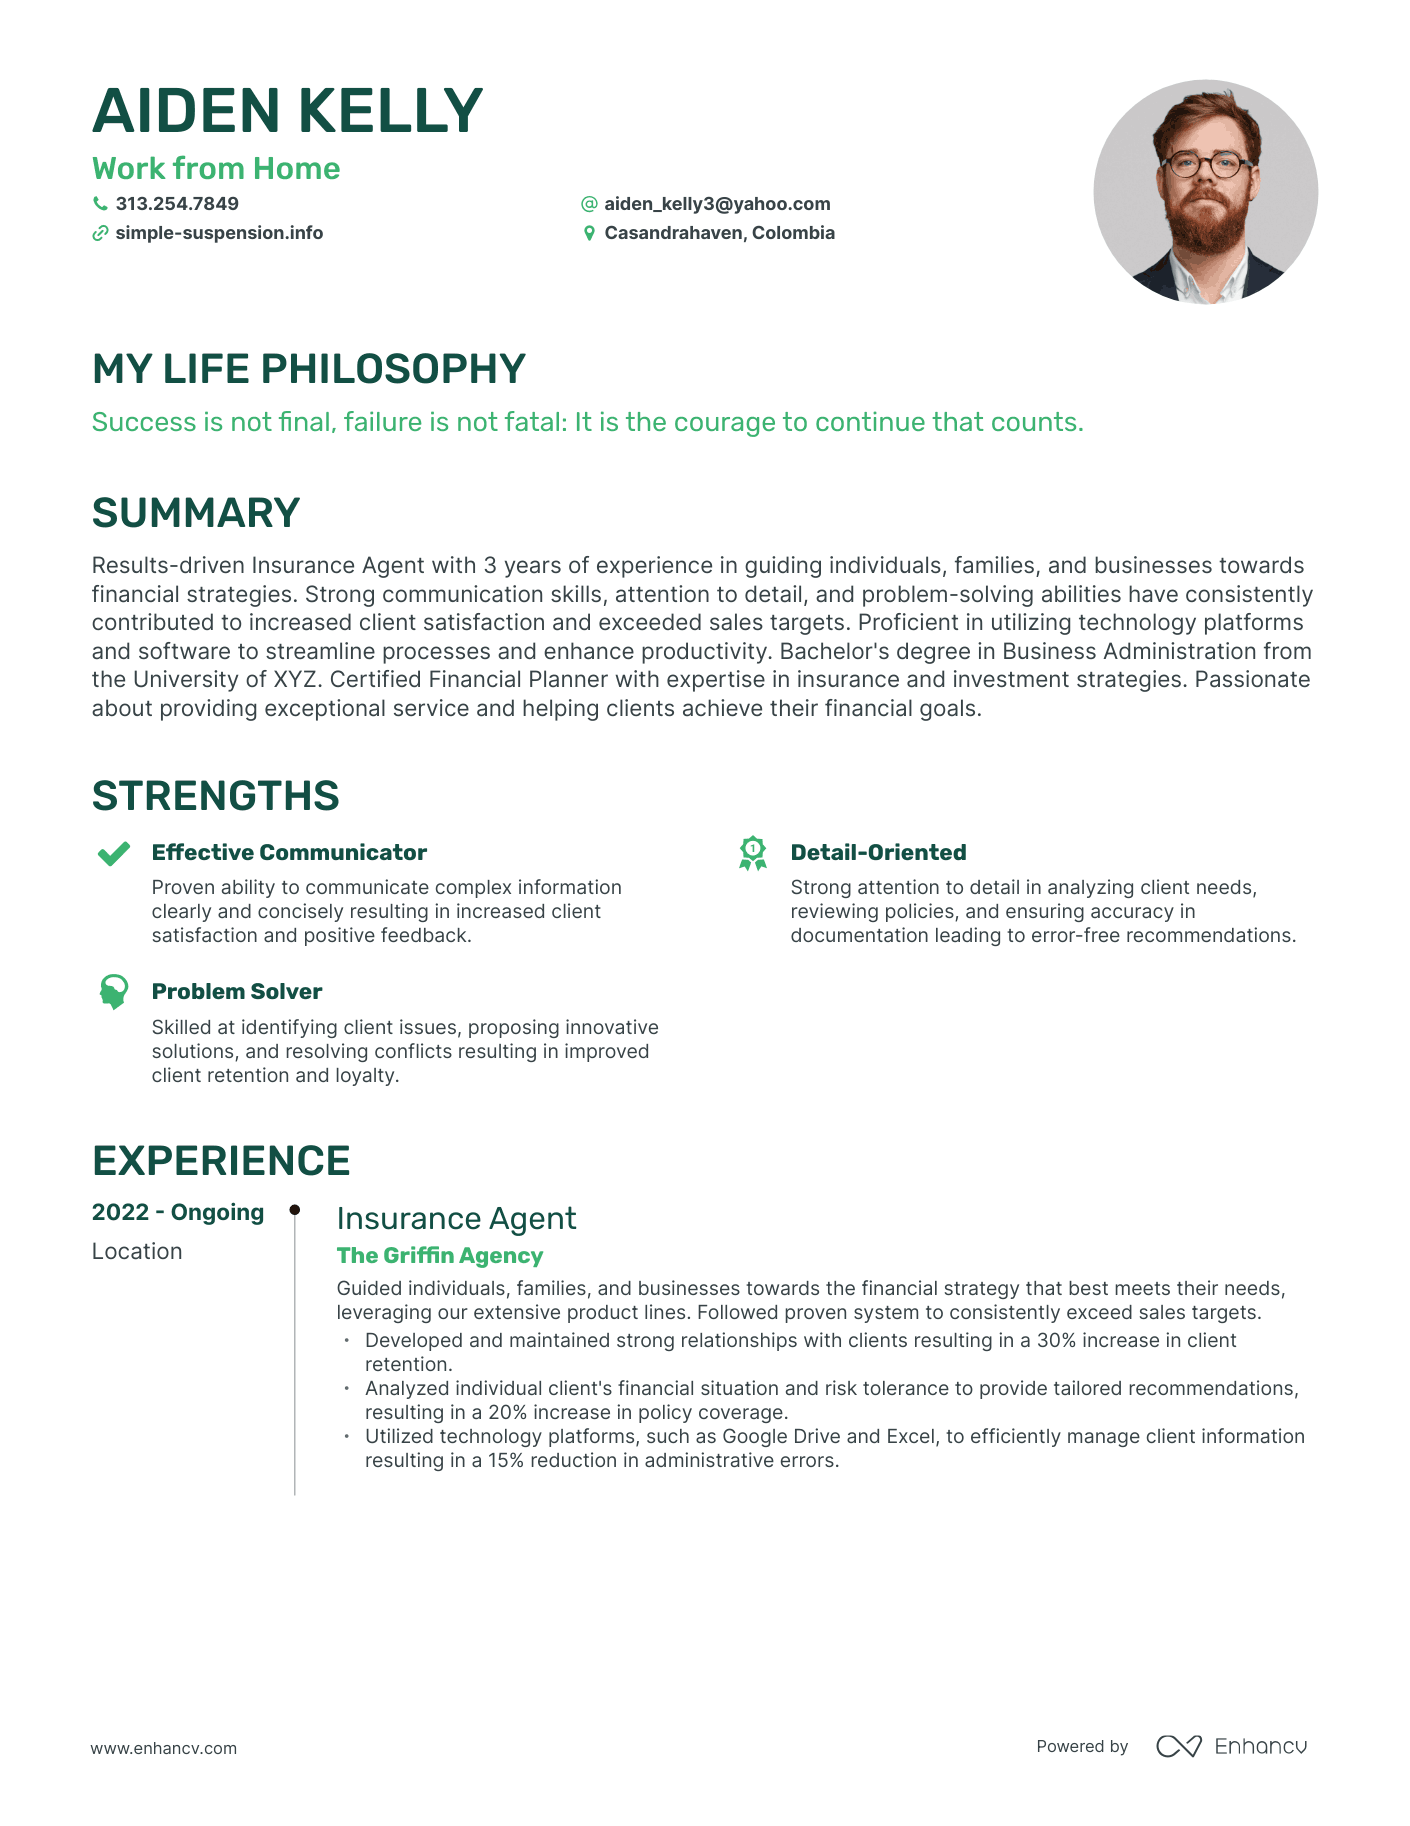 Creative Work from Home Resume Example